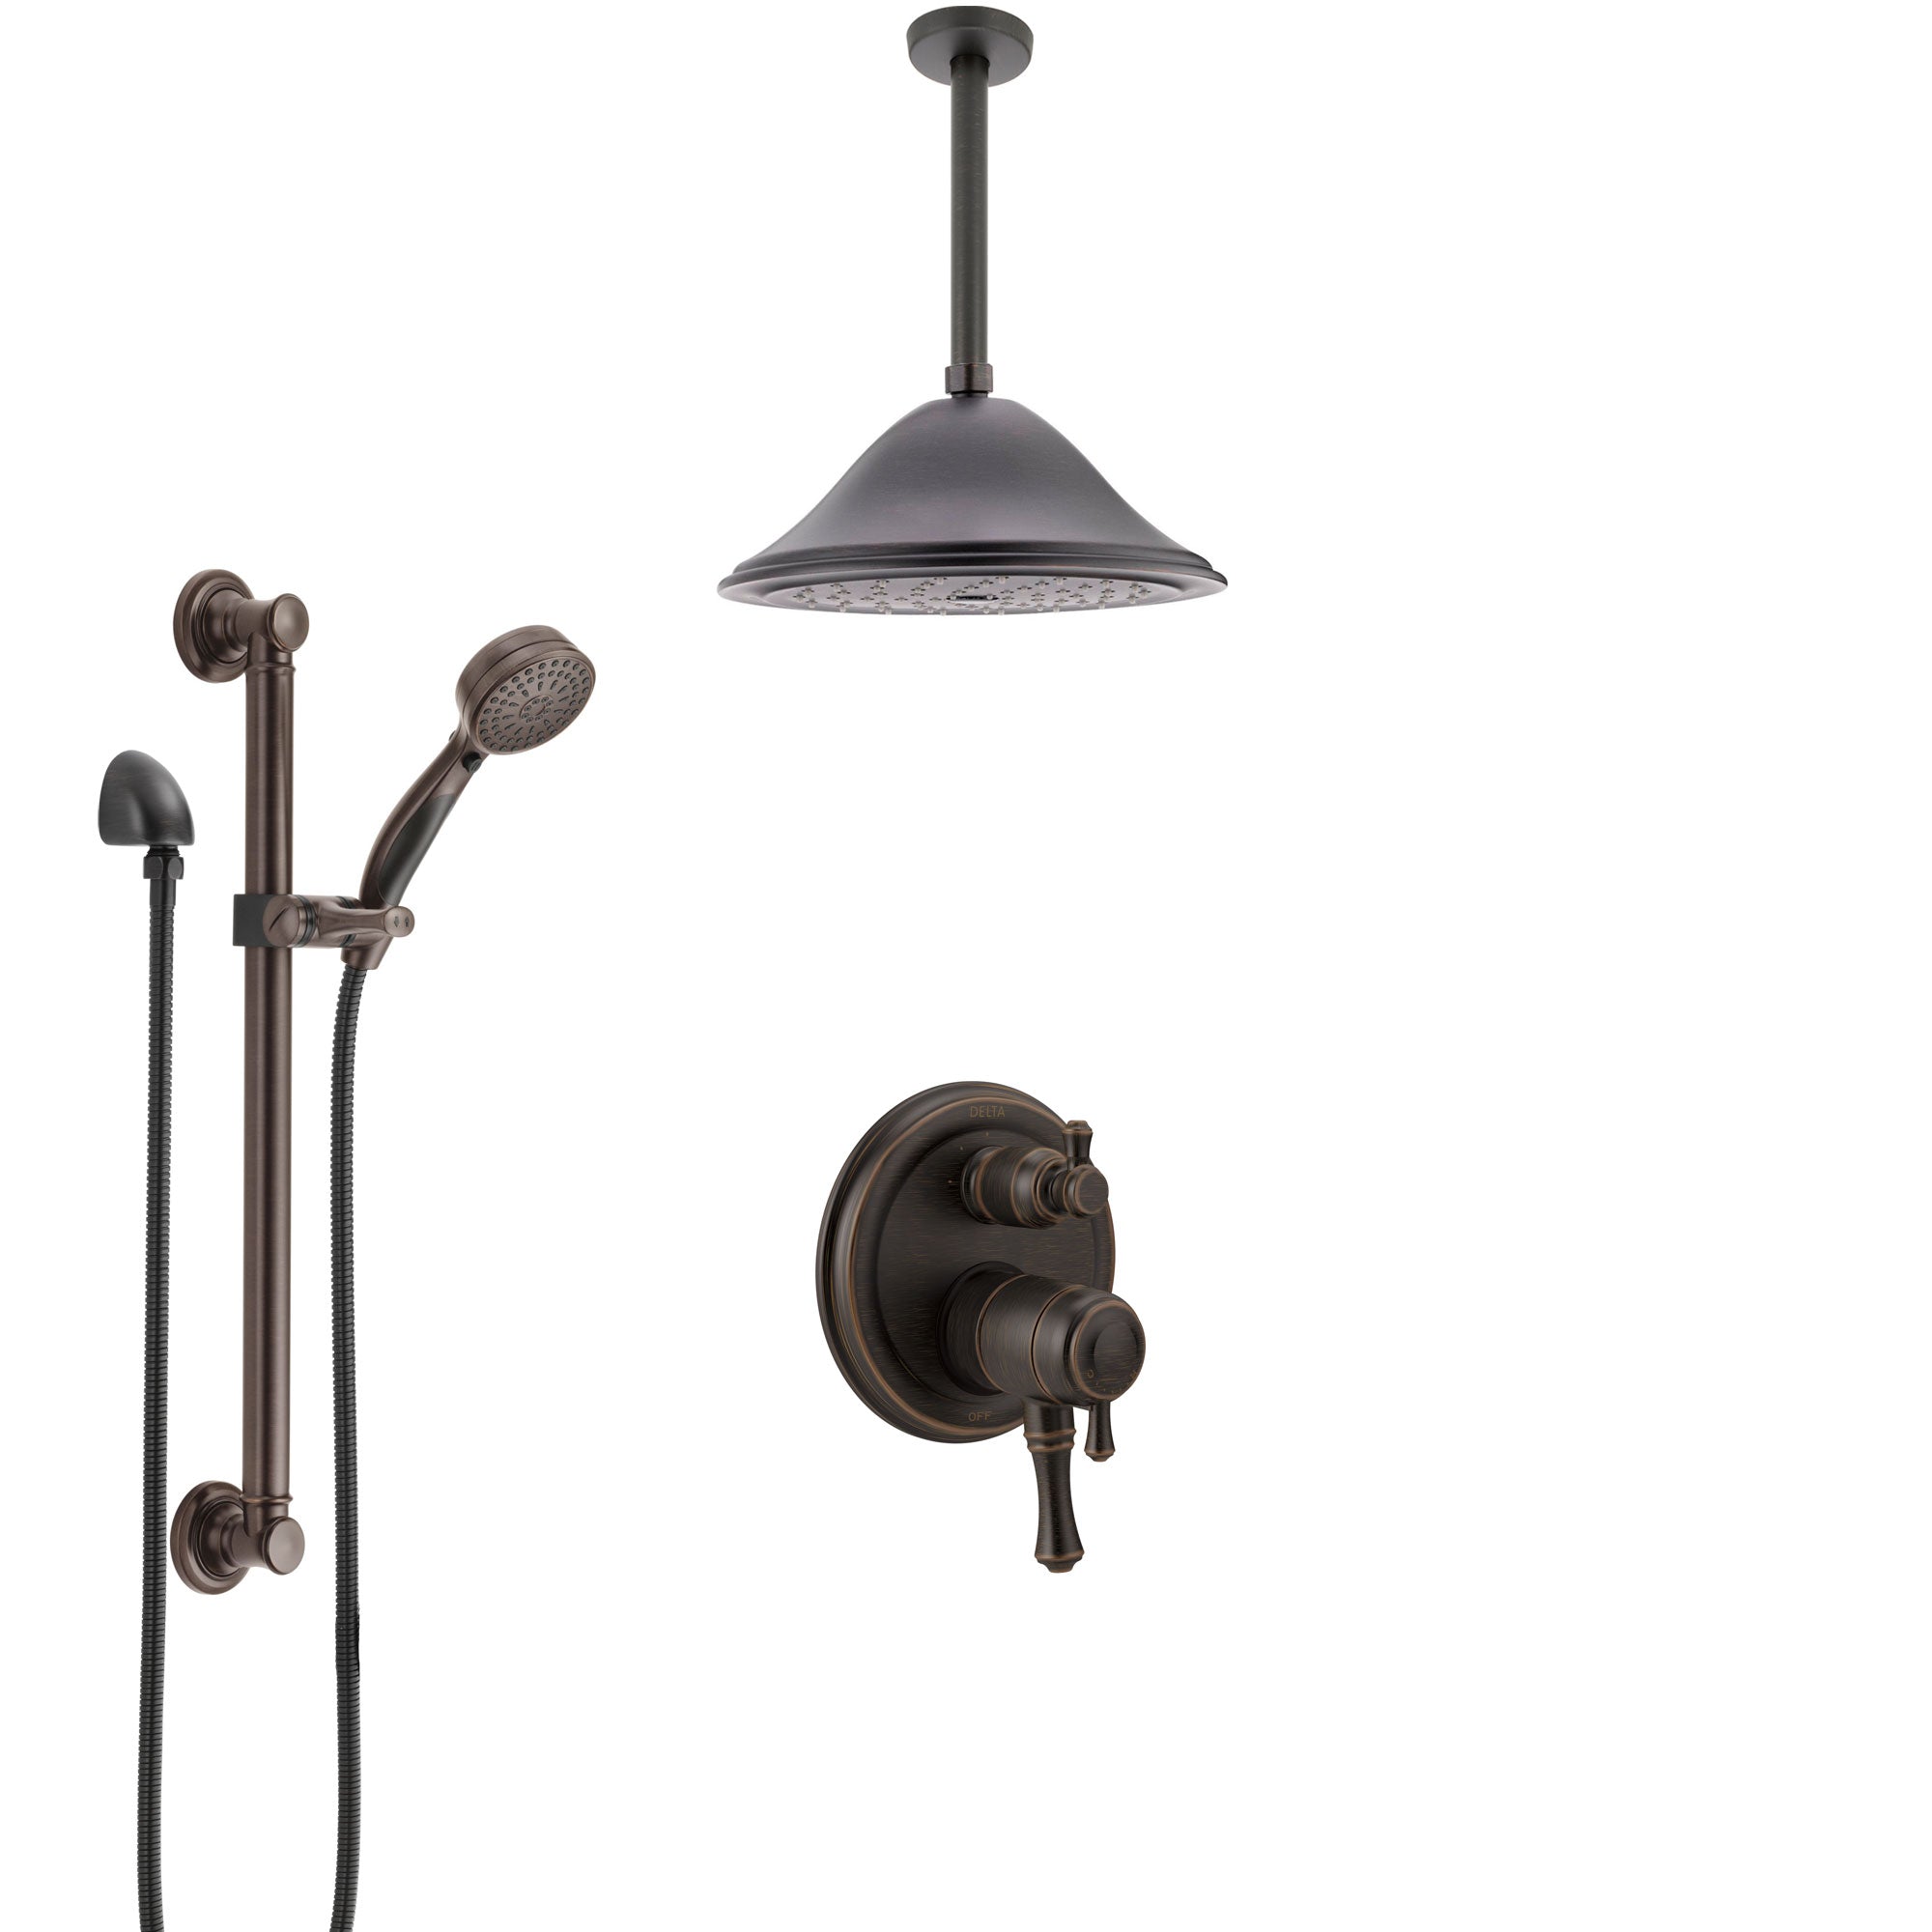 Delta Cassidy Venetian Bronze Shower System with Dual Control Handle, Integrated Diverter, Ceiling Showerhead, and Grab Bar Hand Shower SS27897RB8